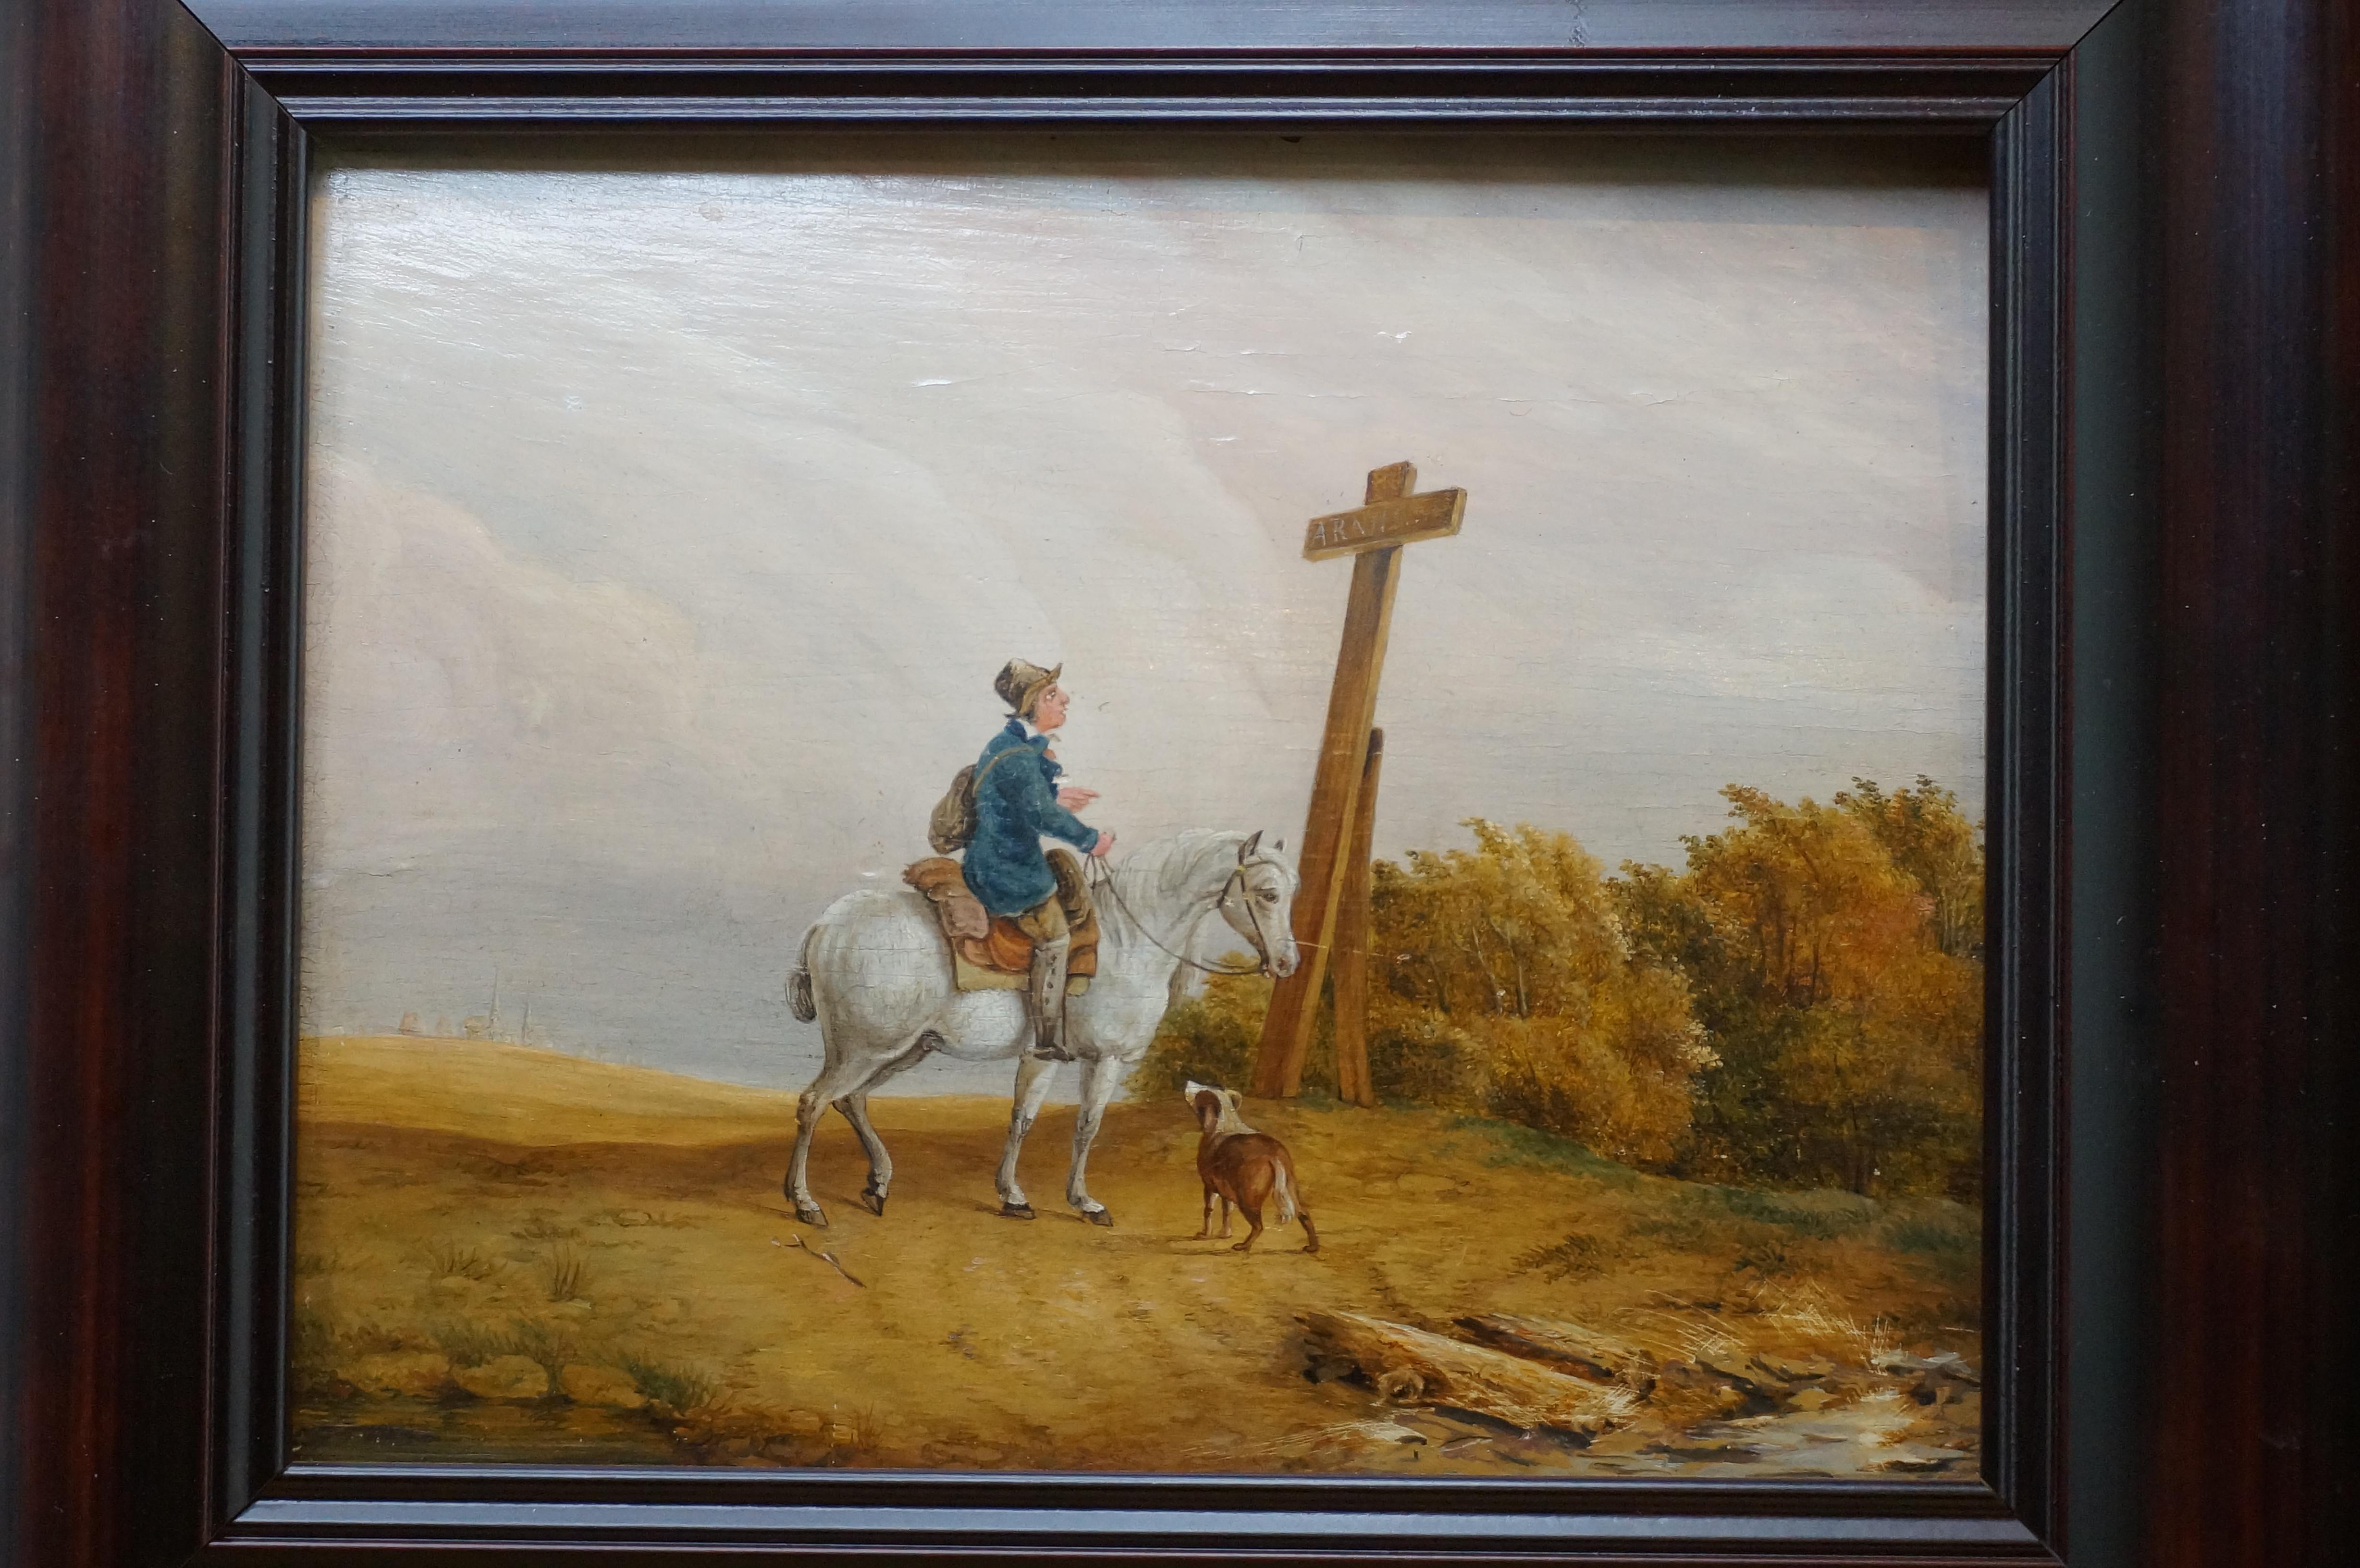 Painting with a traveler on a white horse and accompanied by a dog looking up at a road sign in the form of a cross. On the roadsign is ” Arnhem”. (a town at the Rhine river in the Eastern part of the Netherlands). The rather sandy landscape gives